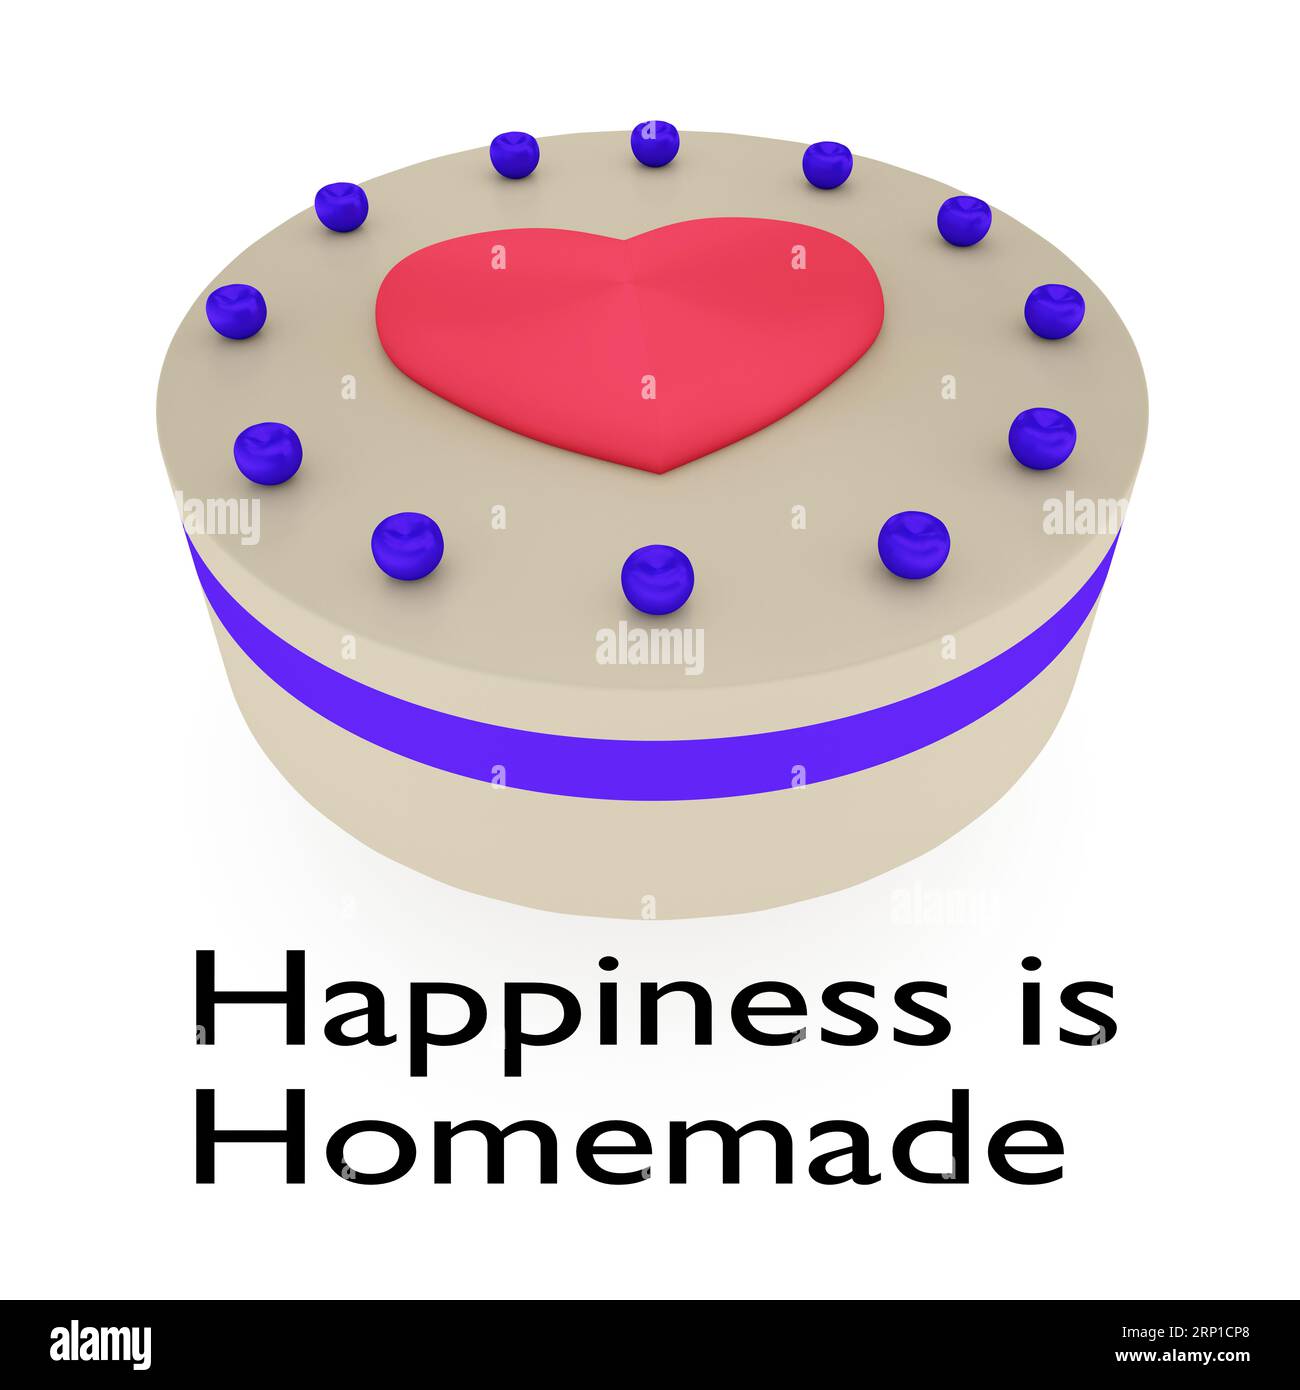 3D illustration of a red heart on top of a cake, titled as Happiness is Homemade. Stock Photo